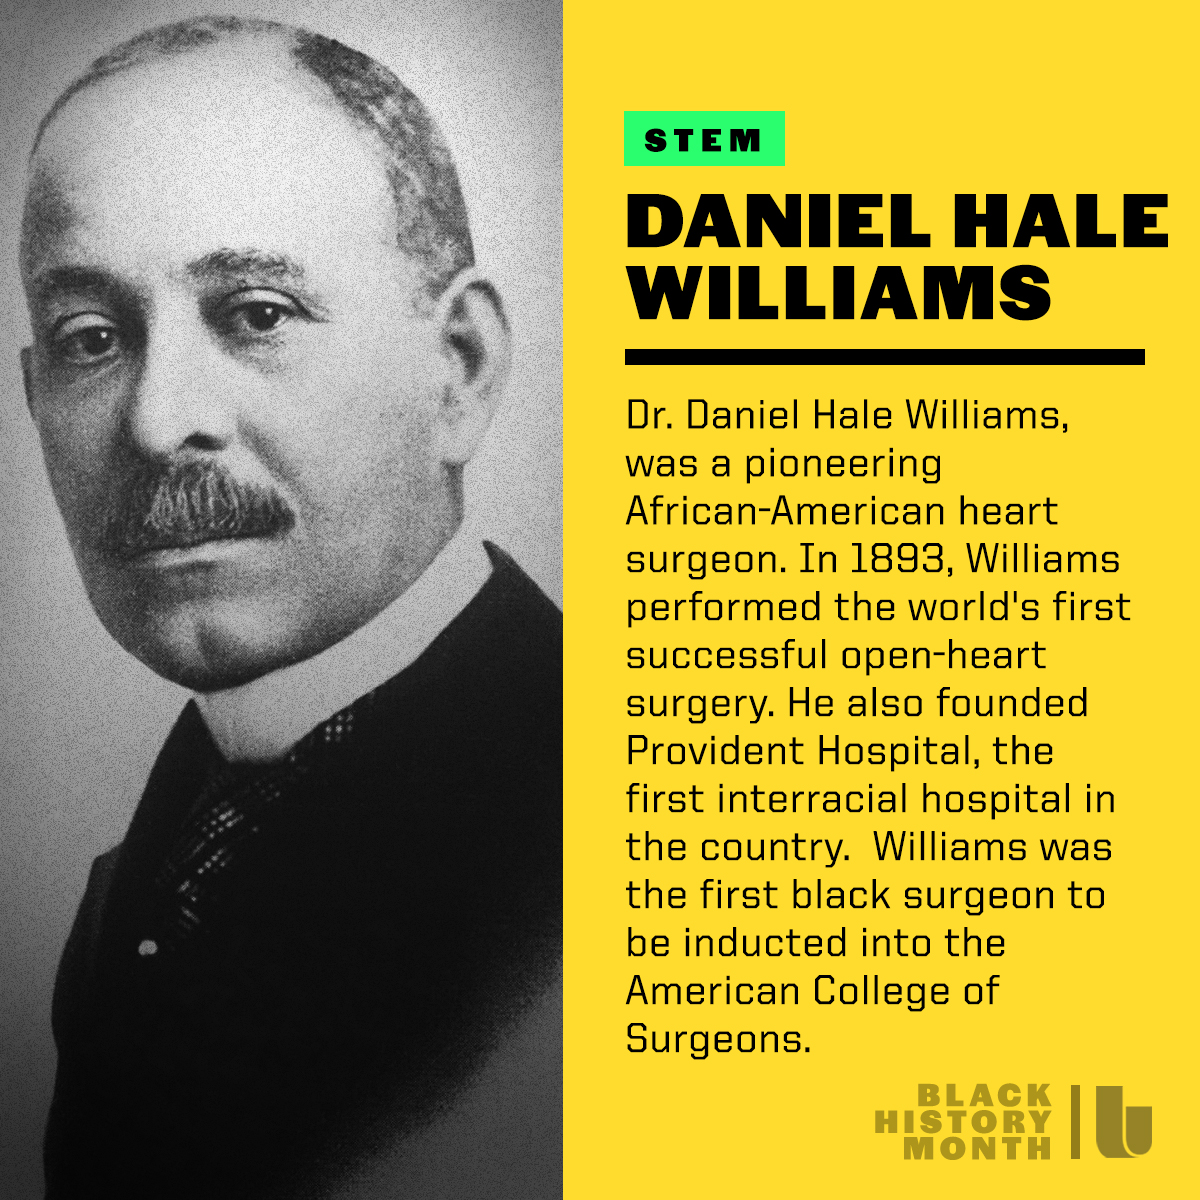 Twitter 上的Andscape："Today we highlight Dr. Daniel Hale Williams, a pioneering African-American heart surgeon #BHM https://t.co/9wwy4ycgI1" / Twitter